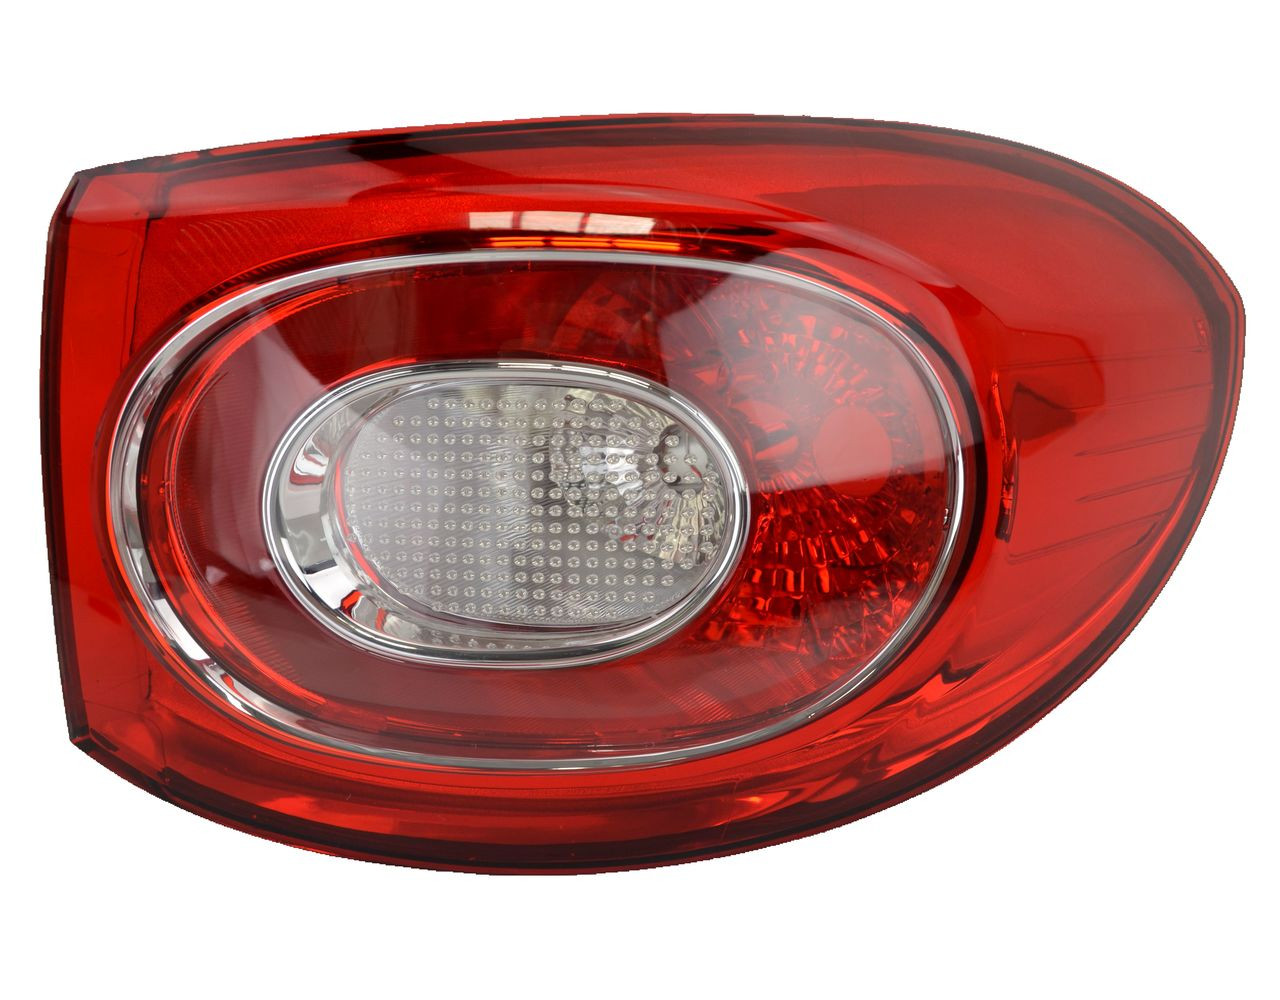 Tail Light for VW Tiguan 5N series 1 11/07-05/11 New Right RHS Rear Lamp 08 09 10